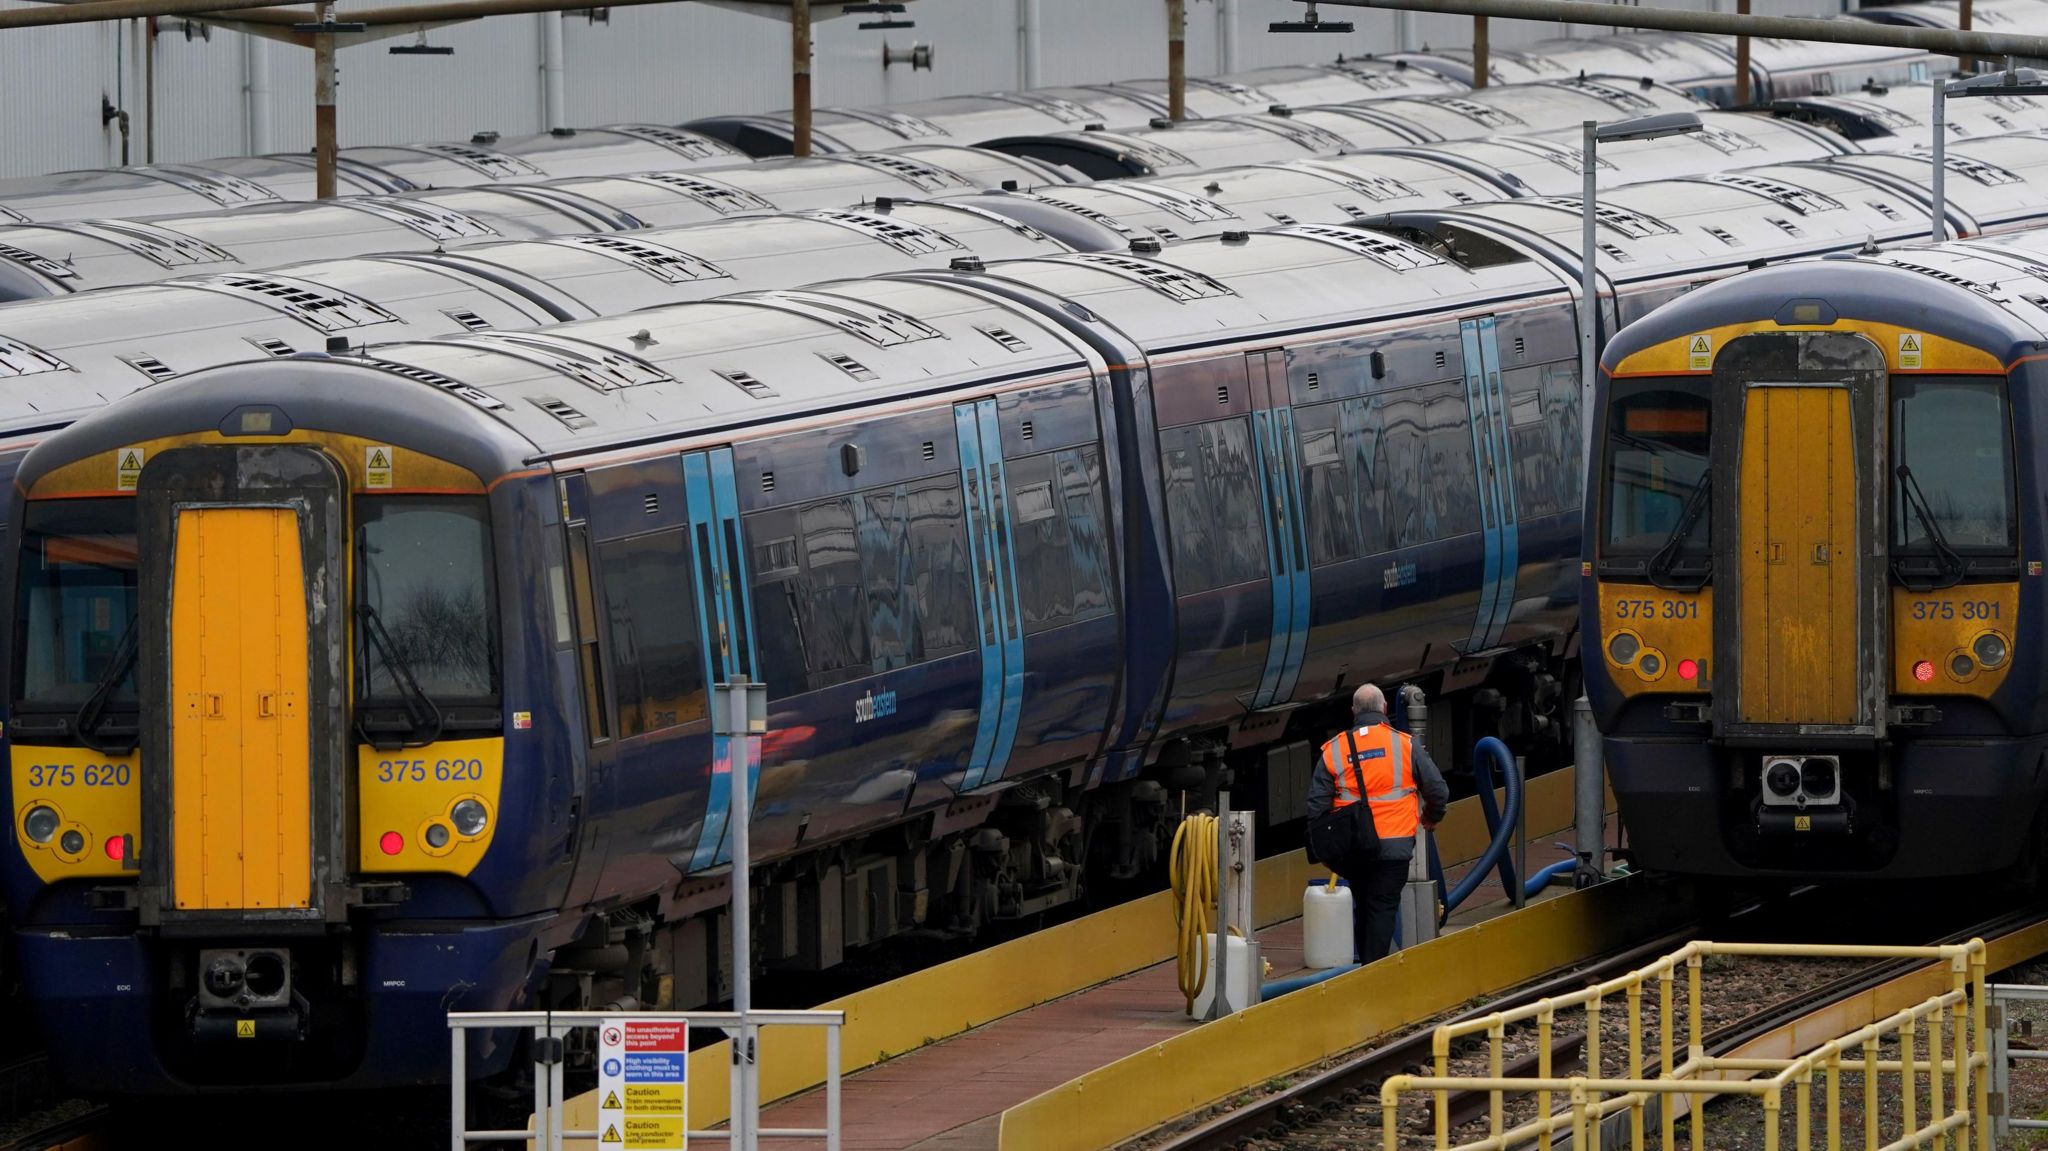 Southeastern trains in sidings at Ramsgate station in Kent during a previous strike